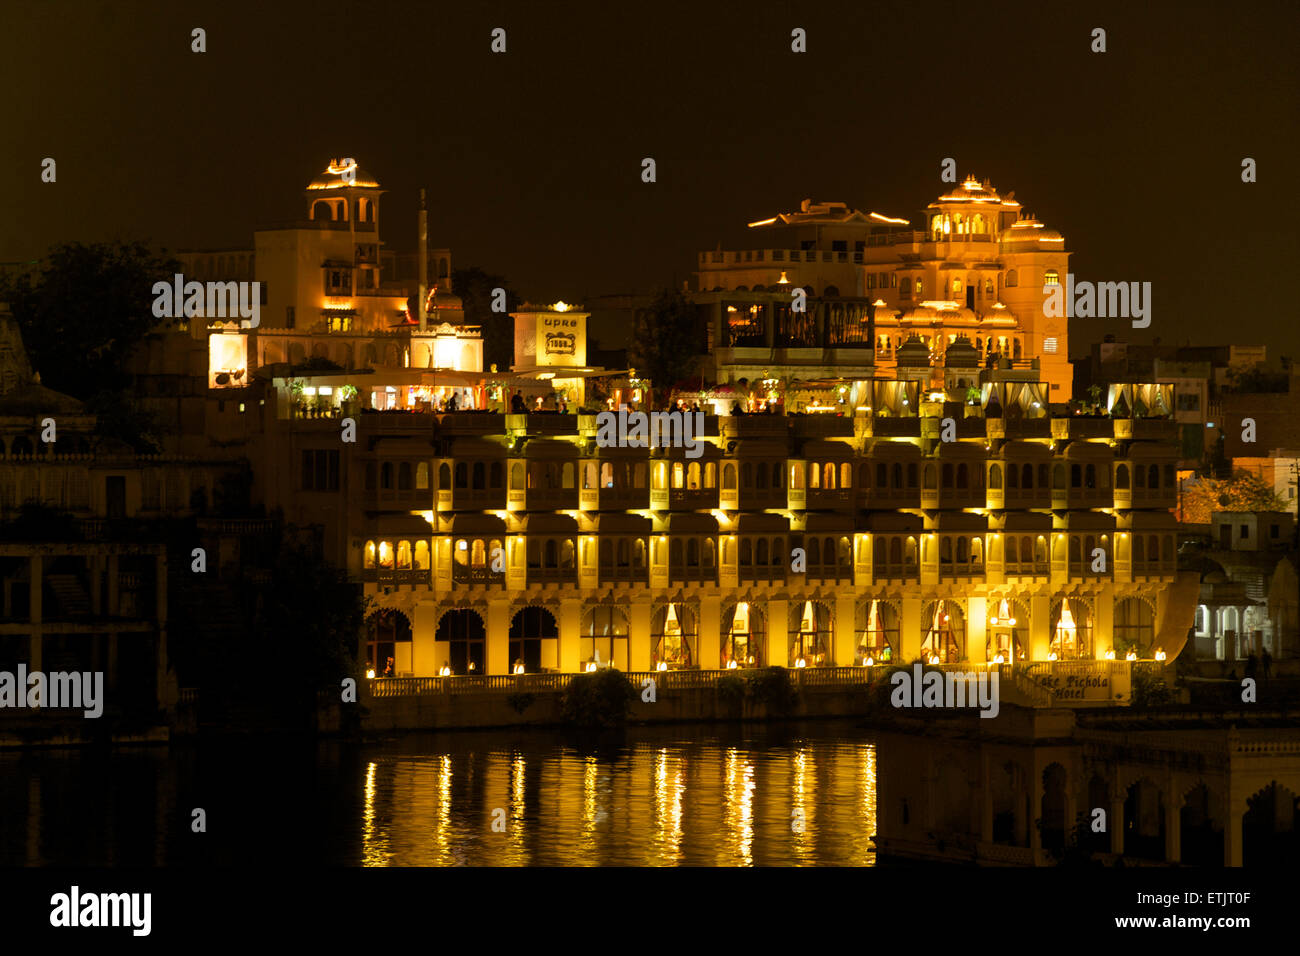 Night view across part of Lake Pichola to the City Palace, Udaipur, Rajasthan, India Stock Photo